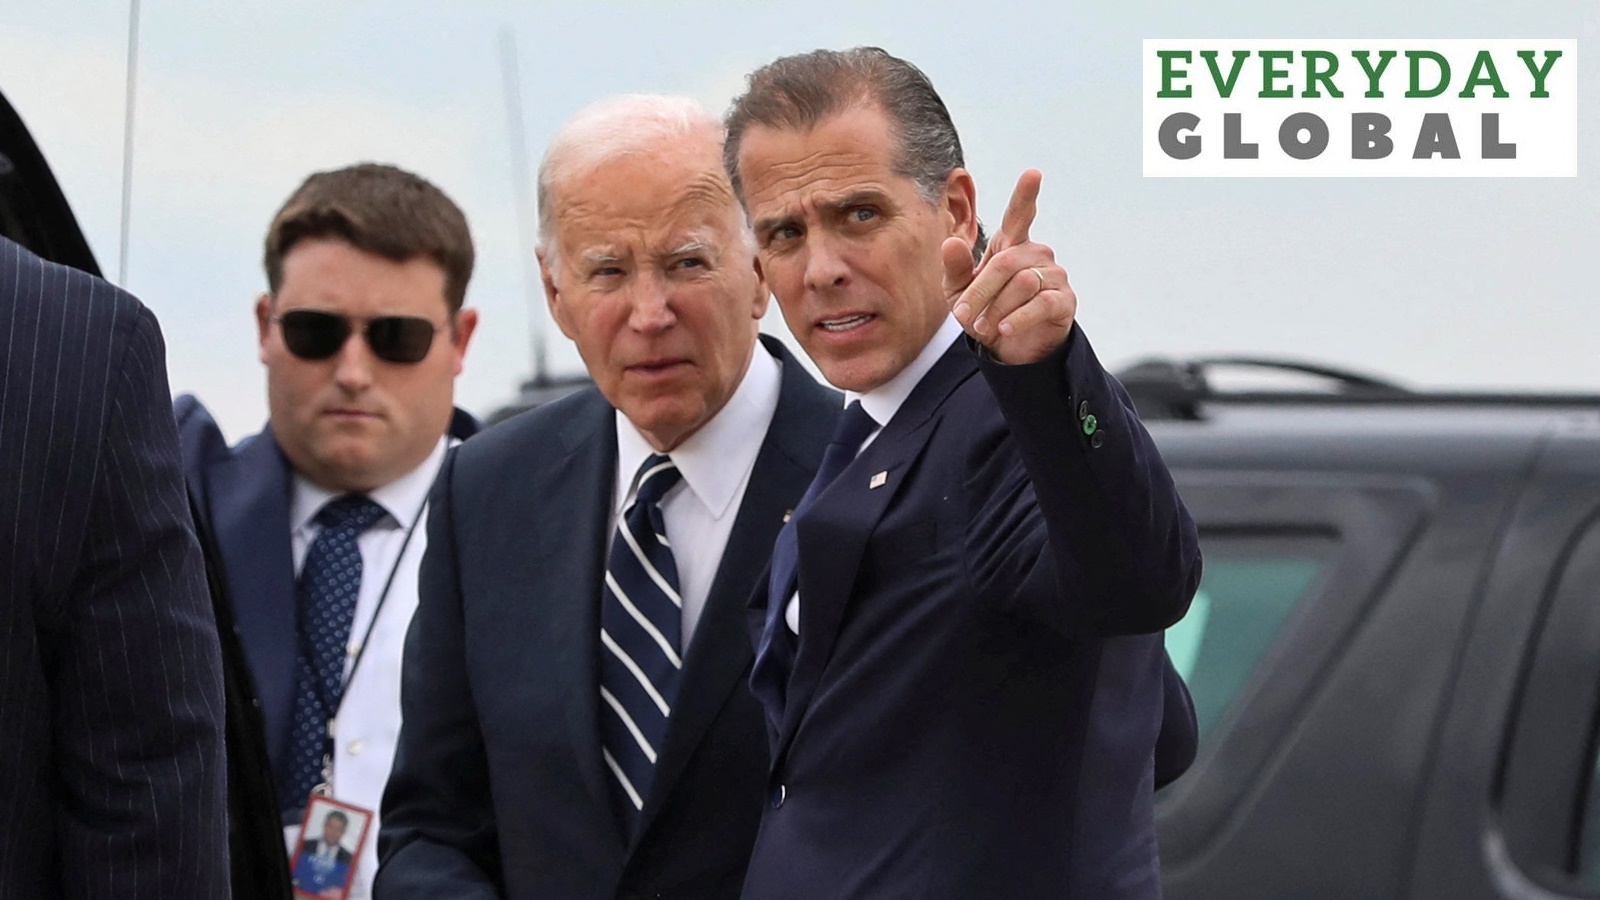 U.S. President Joe Biden stands with his son Hunter Biden, who earlier in the day was found guilty on all three counts in his criminal gun charges trial, as President Biden arrived at the Delaware Air National Guard Base in New Castle, Delaware, U.S., June 11, 2024.